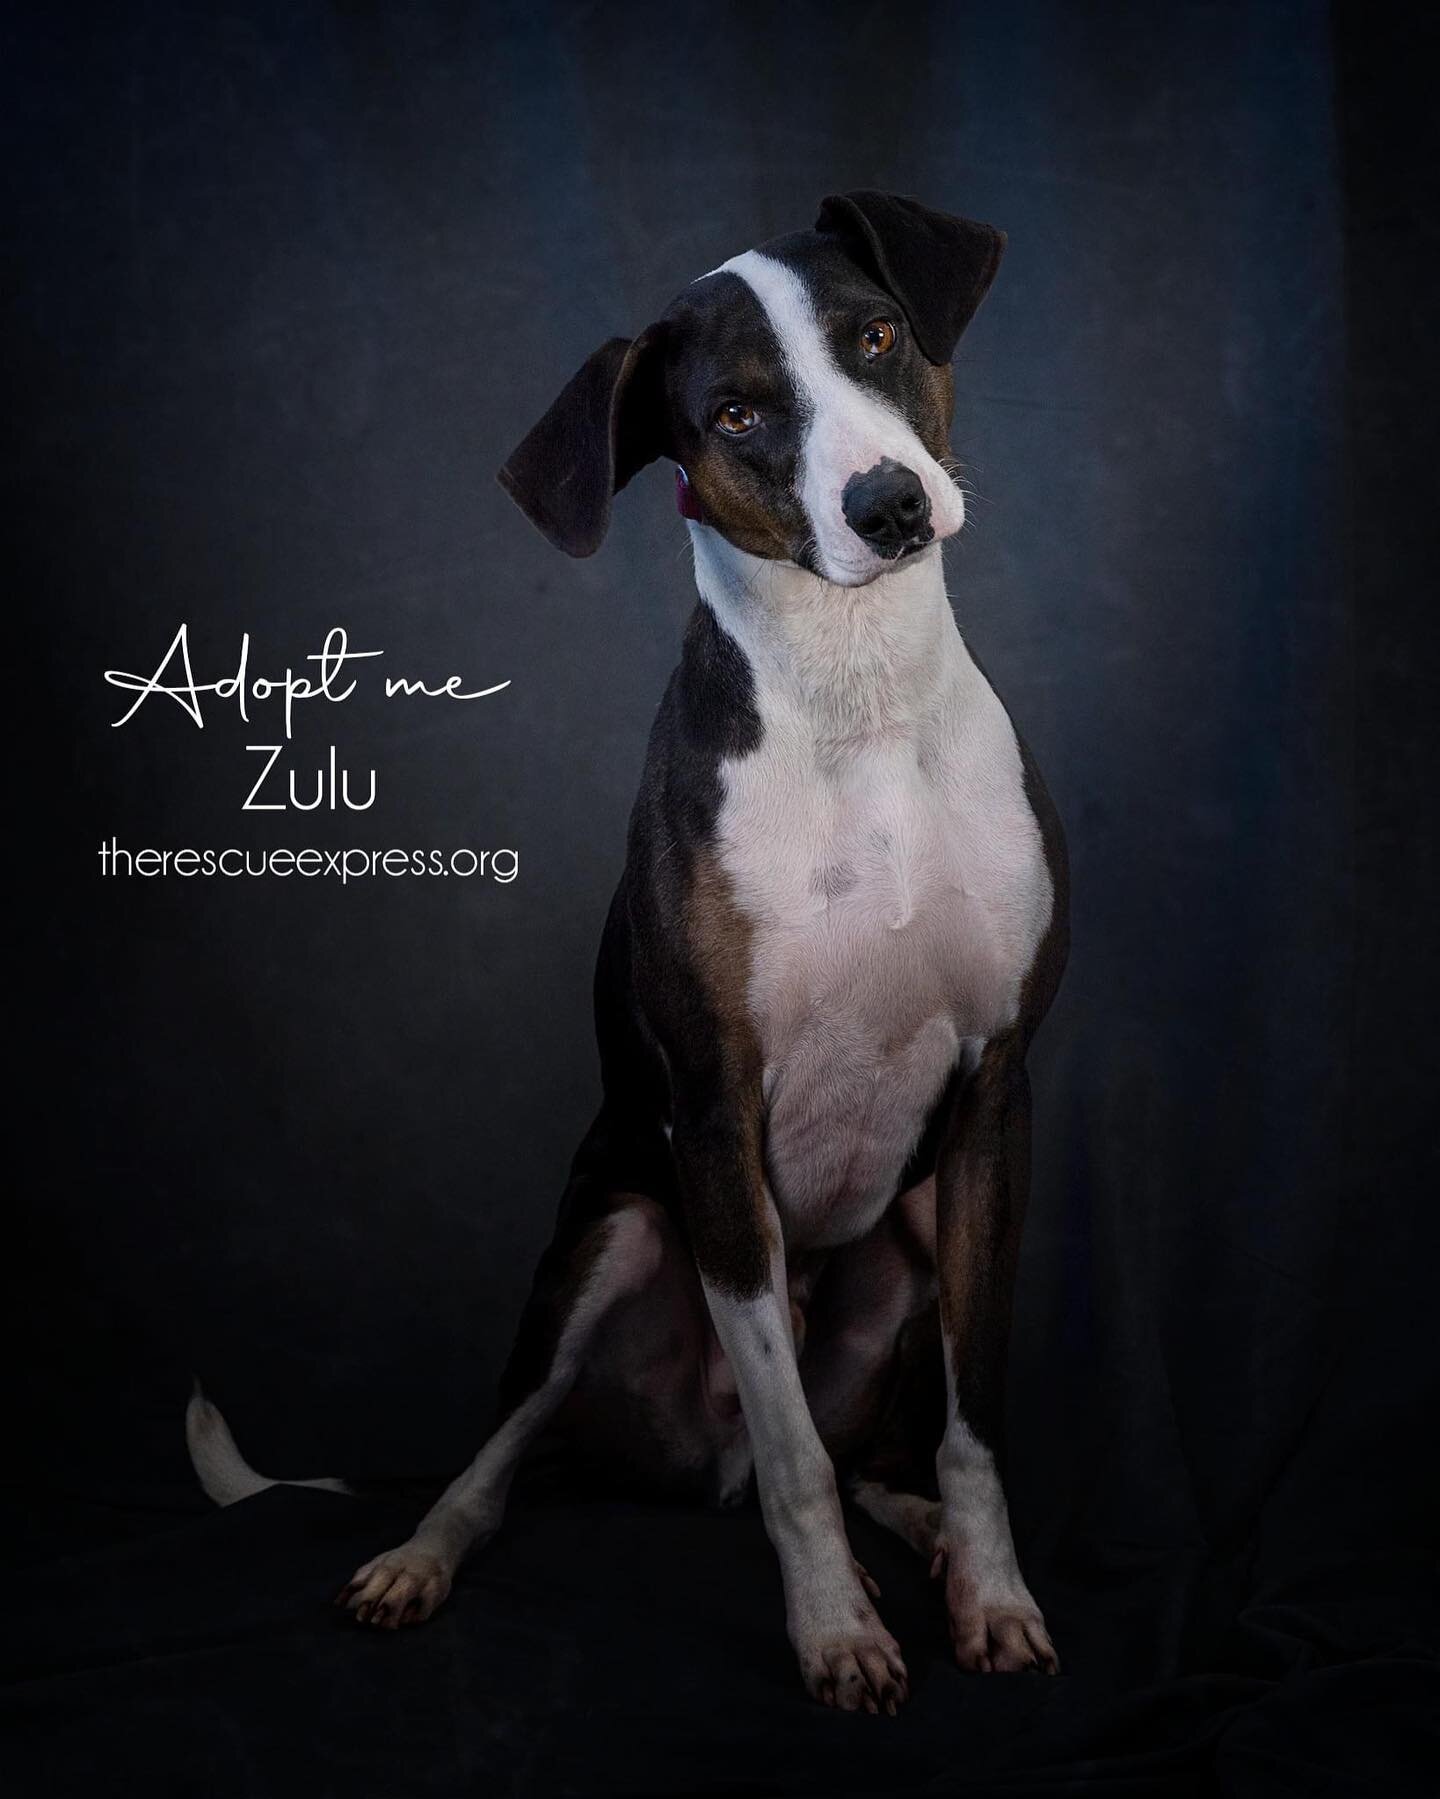 Zulu of @therescueexpress is currently in foster with @abovethestandarddogs  #adoptatraineddog #newjerseypetphotographer #rescuedog #petportrait #lumecube #canonr5